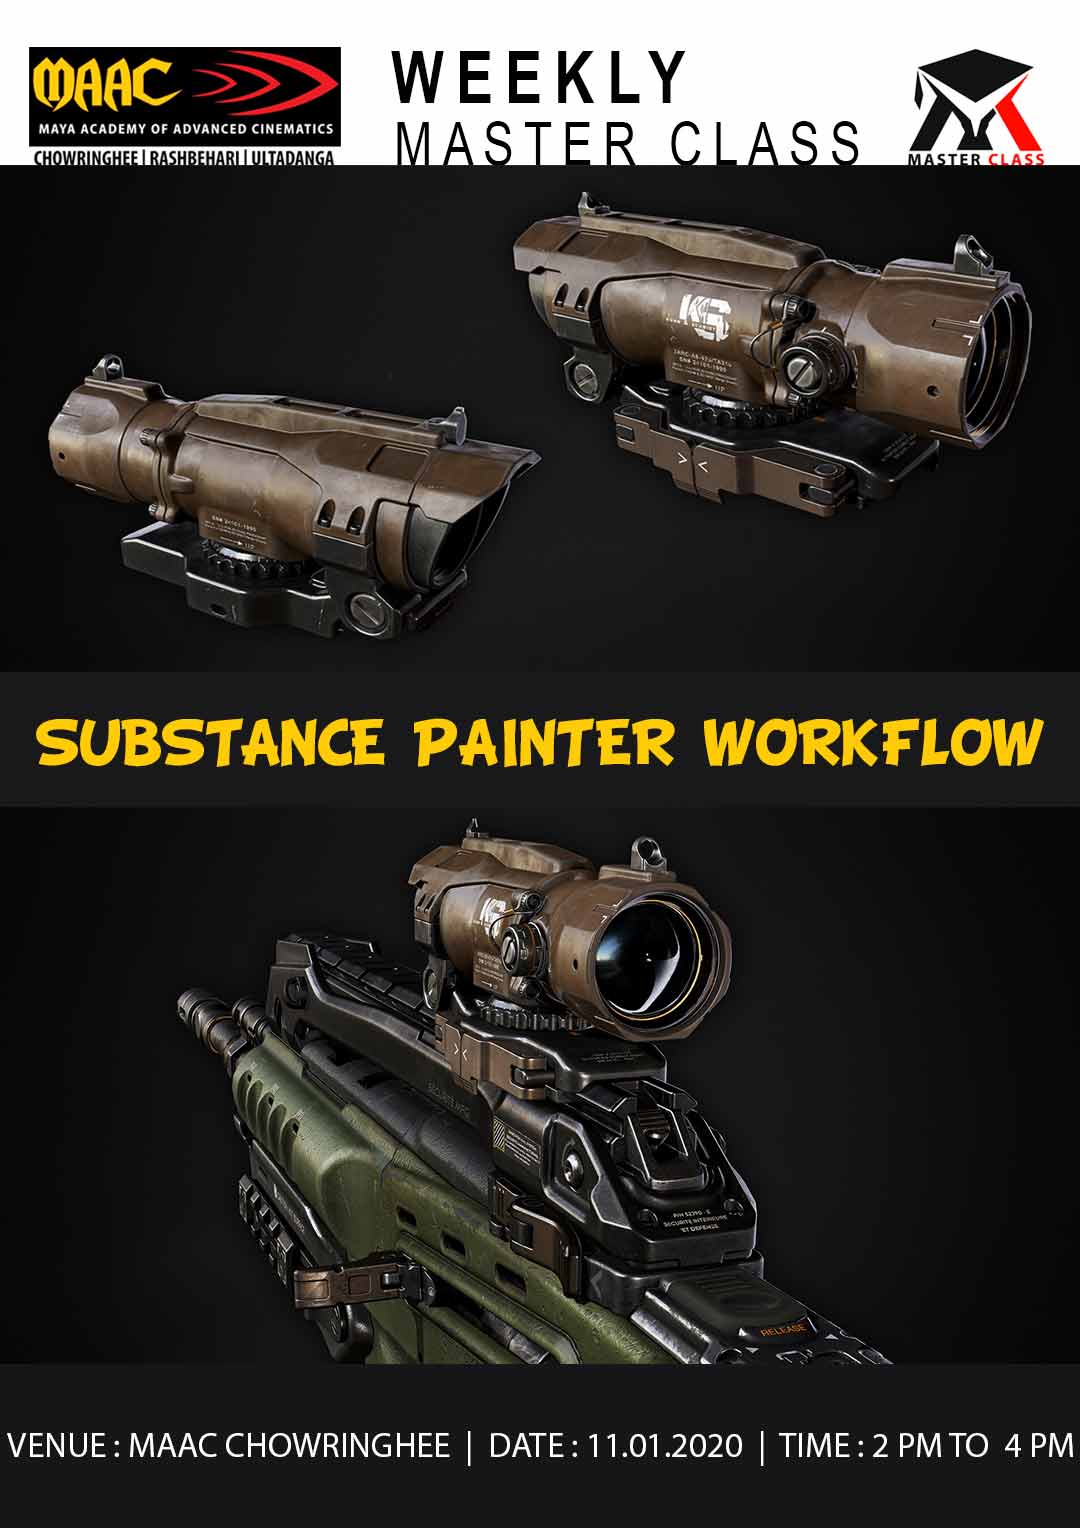 Weekly Master Class on Substance Painter Workflow